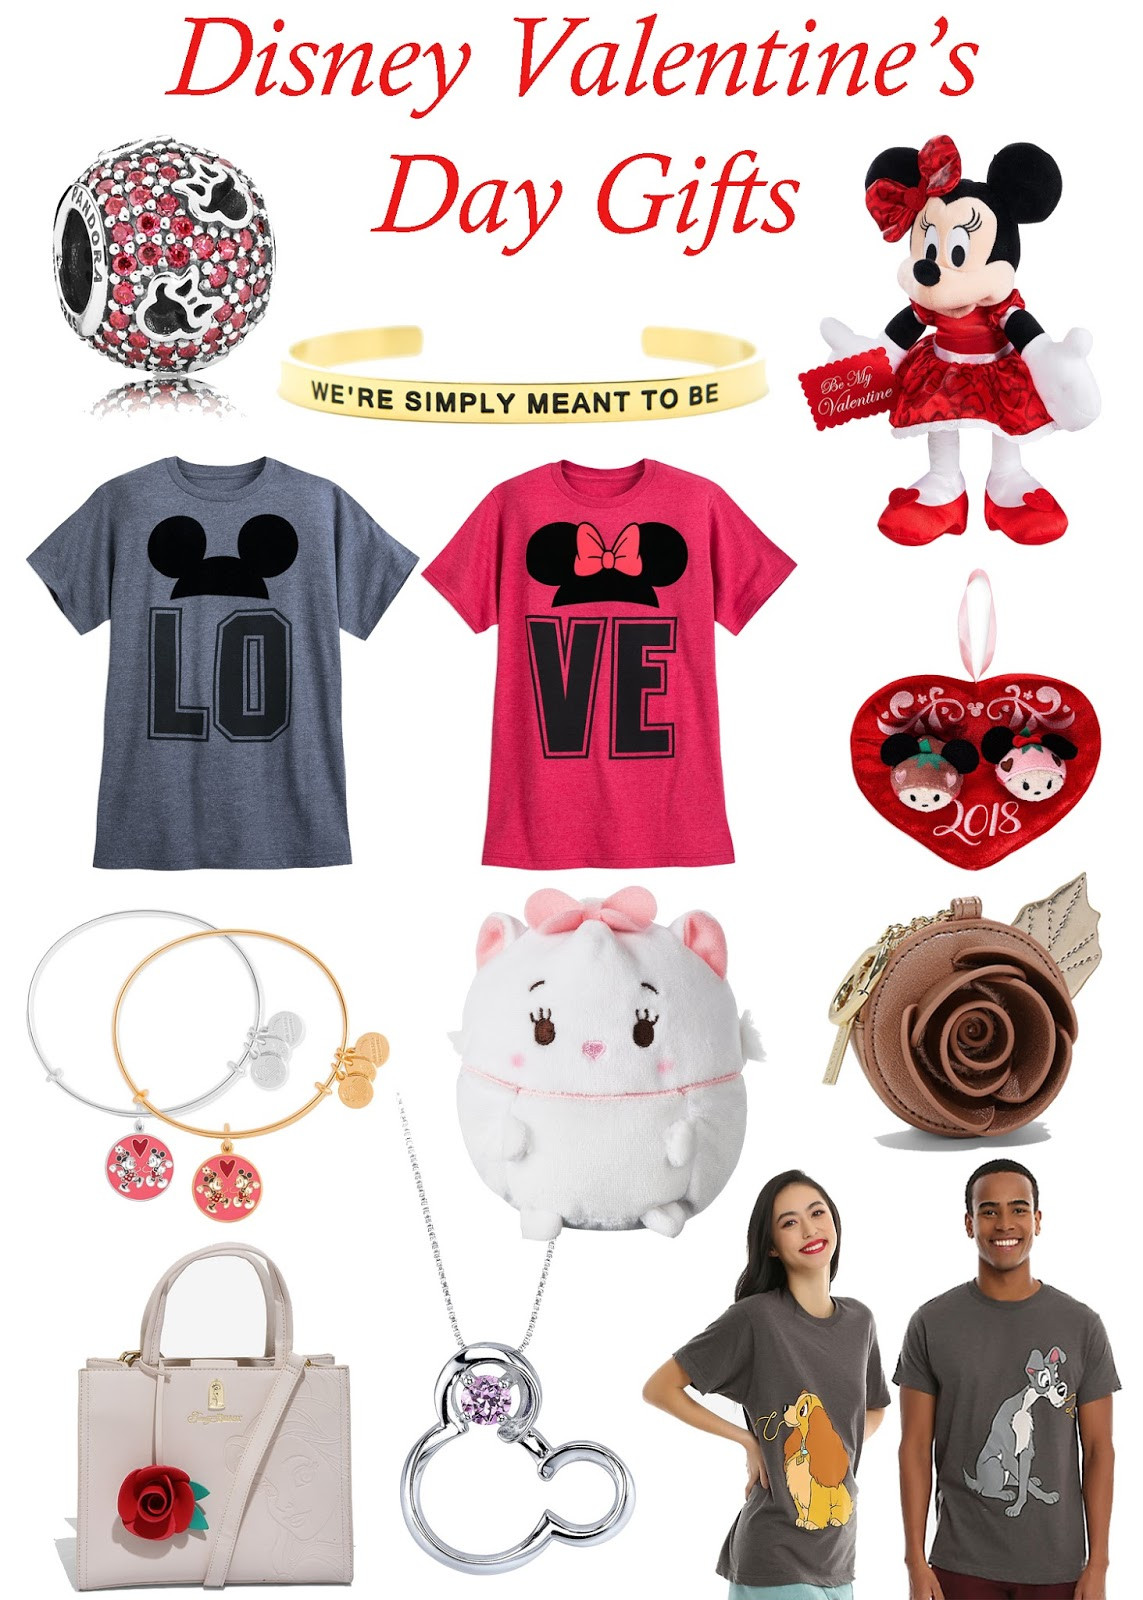 Disney Valentines Day Gifts Unique Sew Cute Dose Of Disney Disney Valentine S Day Gift Ideas